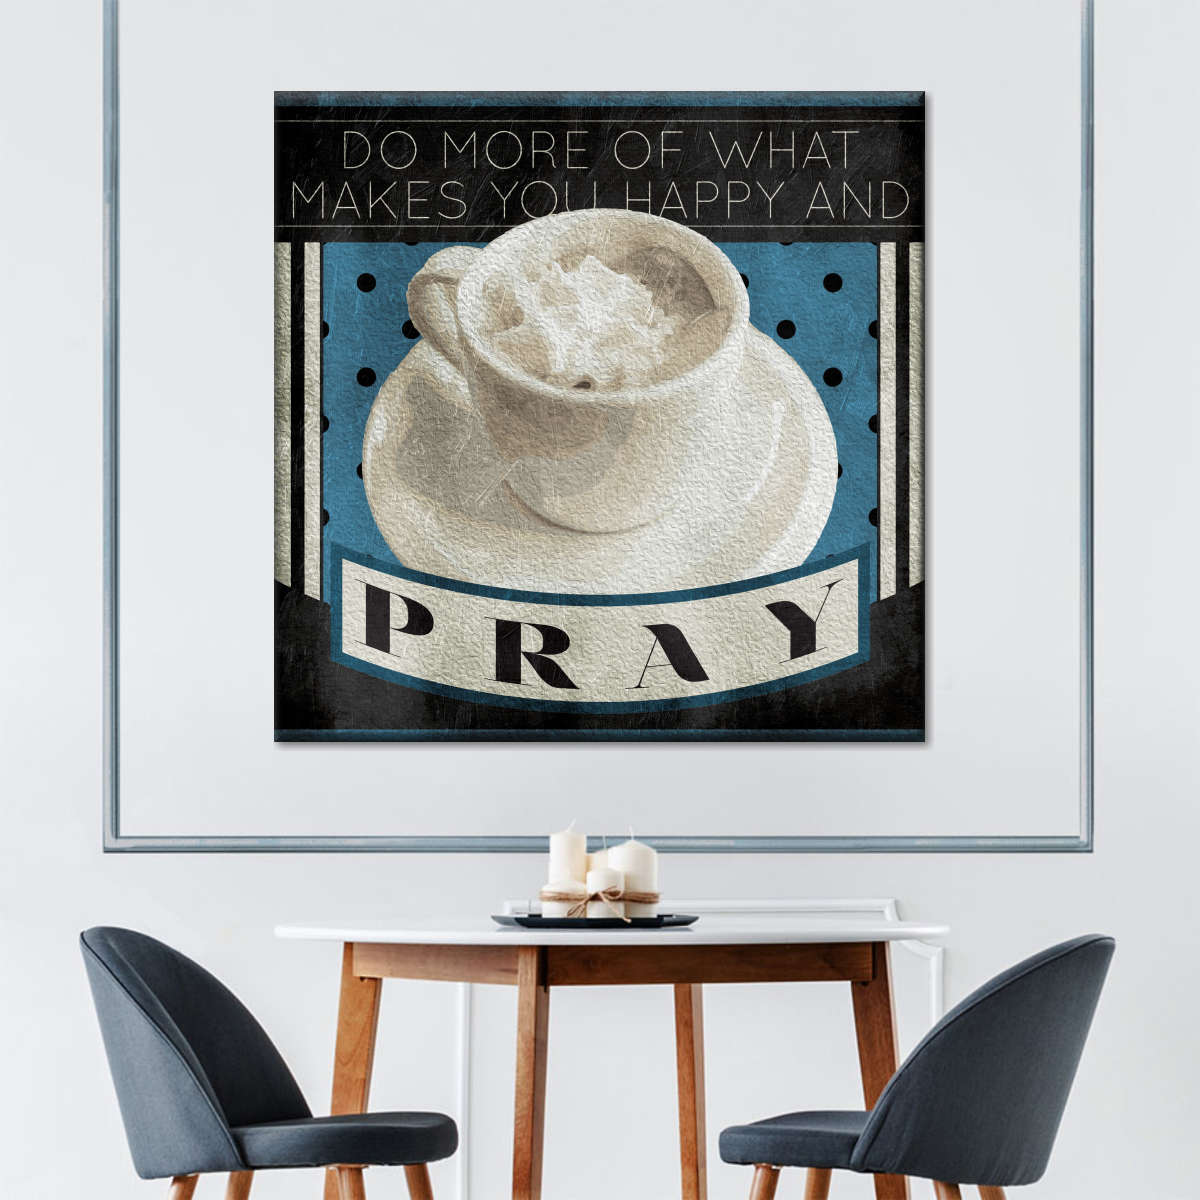 Happy And Pray Square Canvas Wall Art - Christian Wall Decor - Christian Wall Hanging